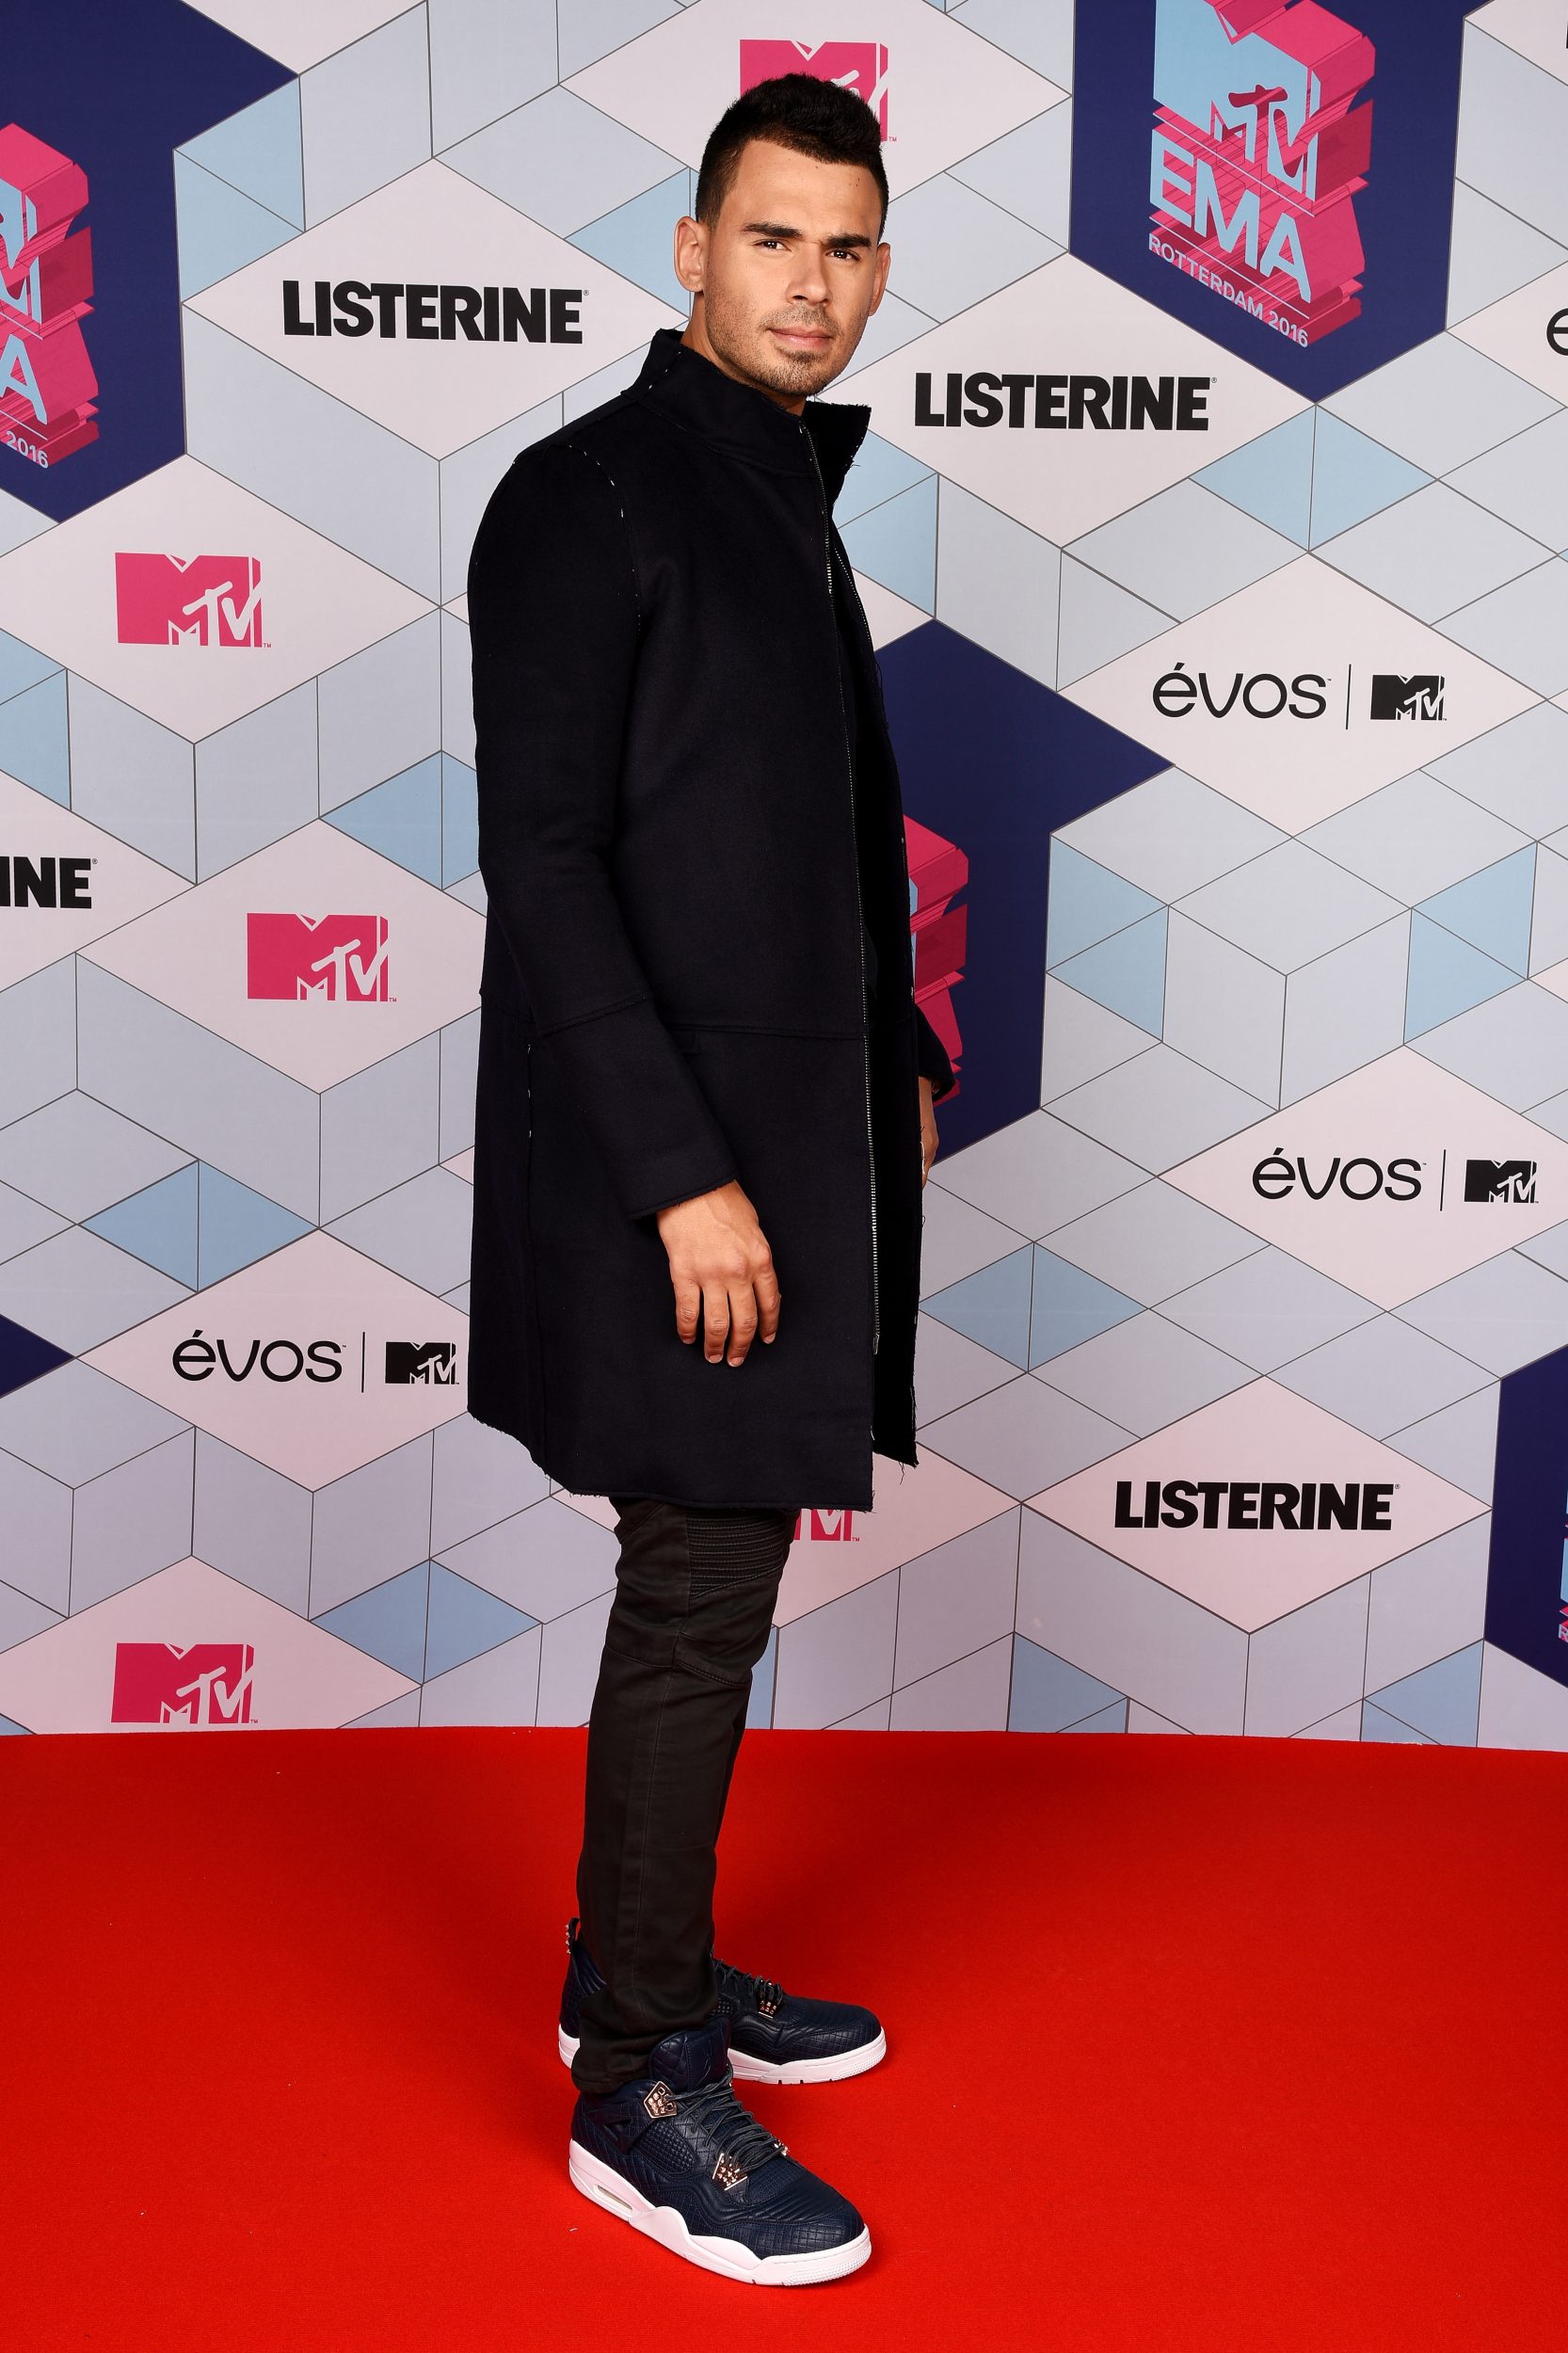 ROTTERDAM, NETHERLANDS - NOVEMBER 06: (EXCLUSIVE COVERAGE) Afrojack attends the MTV Europe Music Awards 2016 on November 6, 2016 in Rotterdam, Netherlands. (Photo by Dave Hogan/MTV 2016/Getty Images) *** Local Caption *** Afrojack